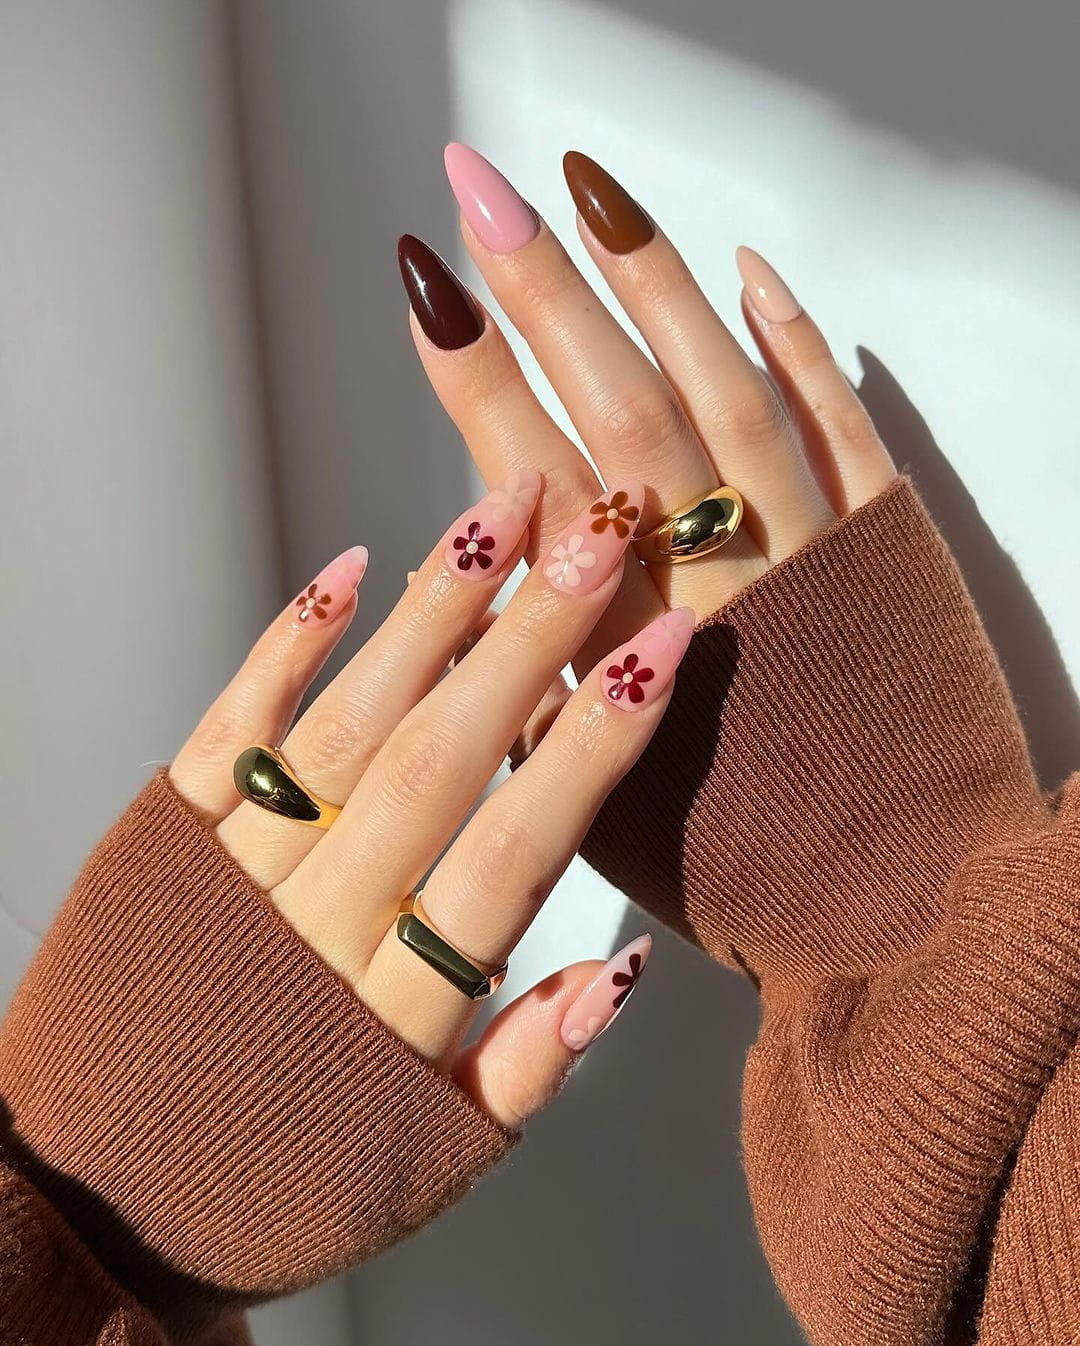 100+ Gorgeous Winter Nail Designs And Ideas images 11